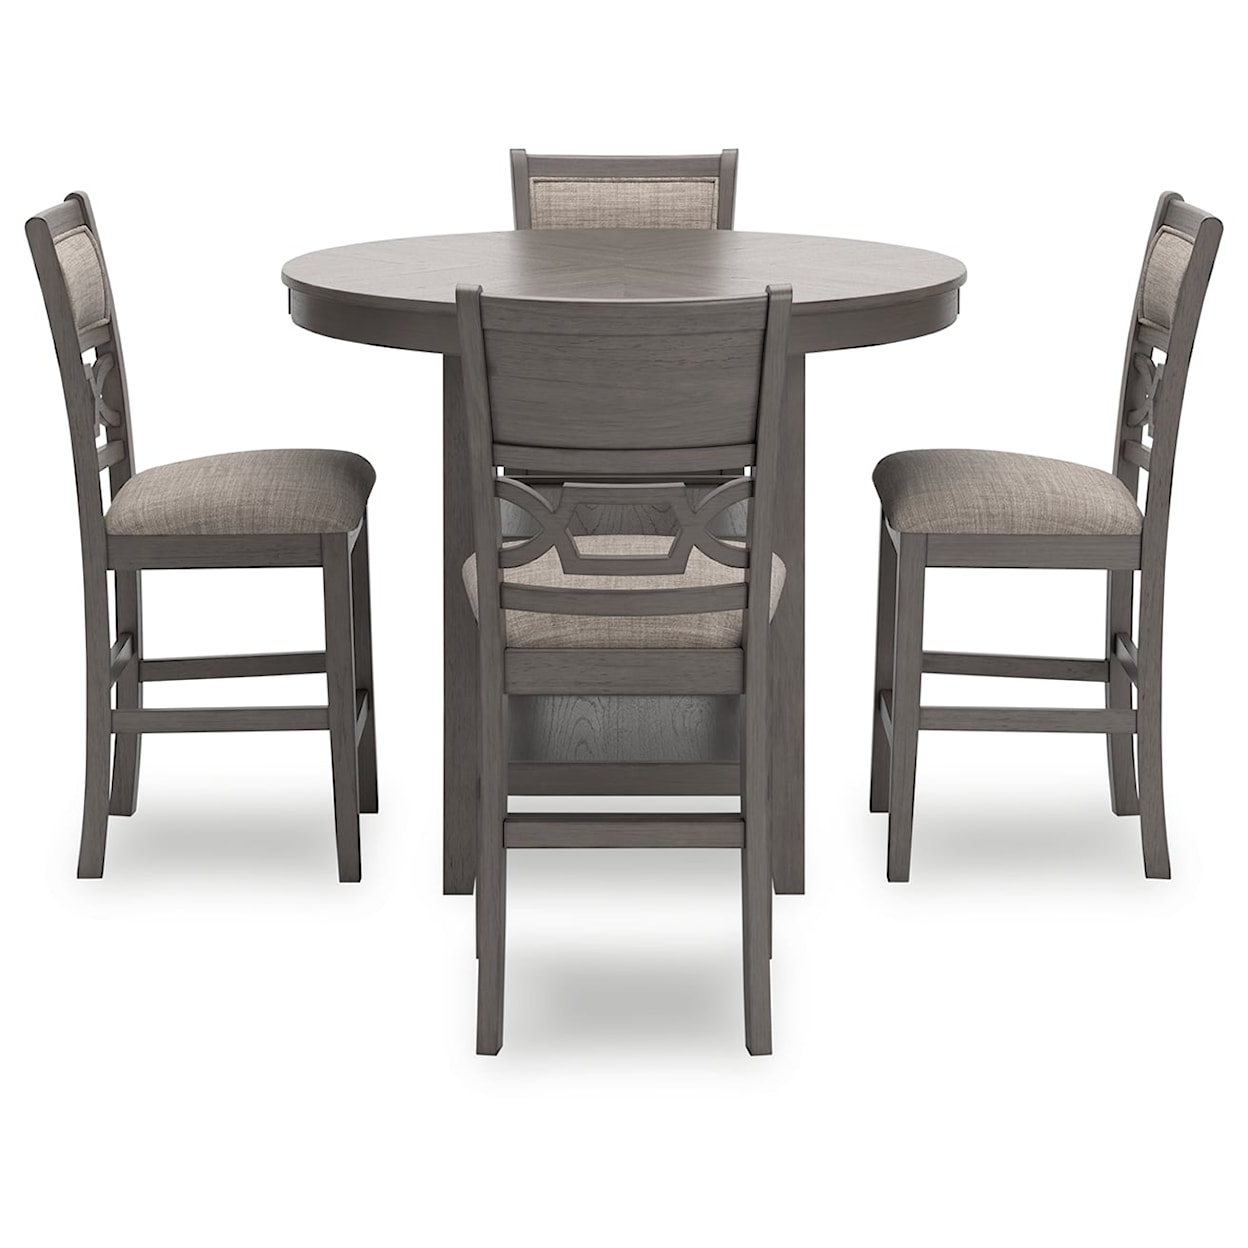 Benchcraft Wrenning Counter Dining Table & 4 Stools (Set of 5)